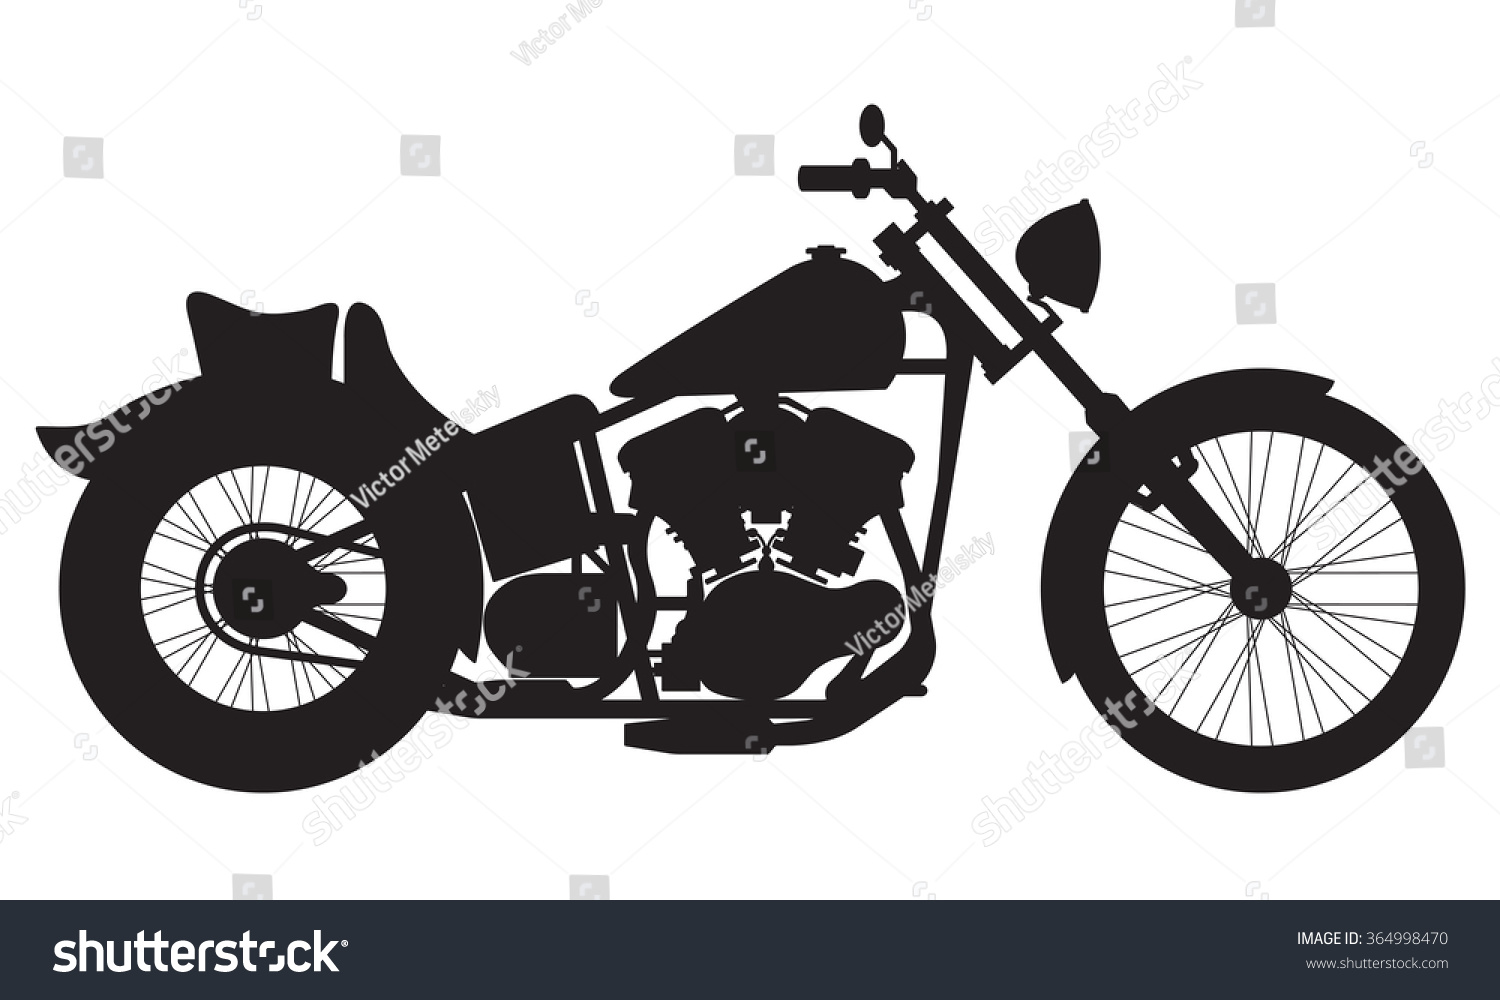 motorcycle silhouette wallpaper hd Motorcycle silhouette clip art